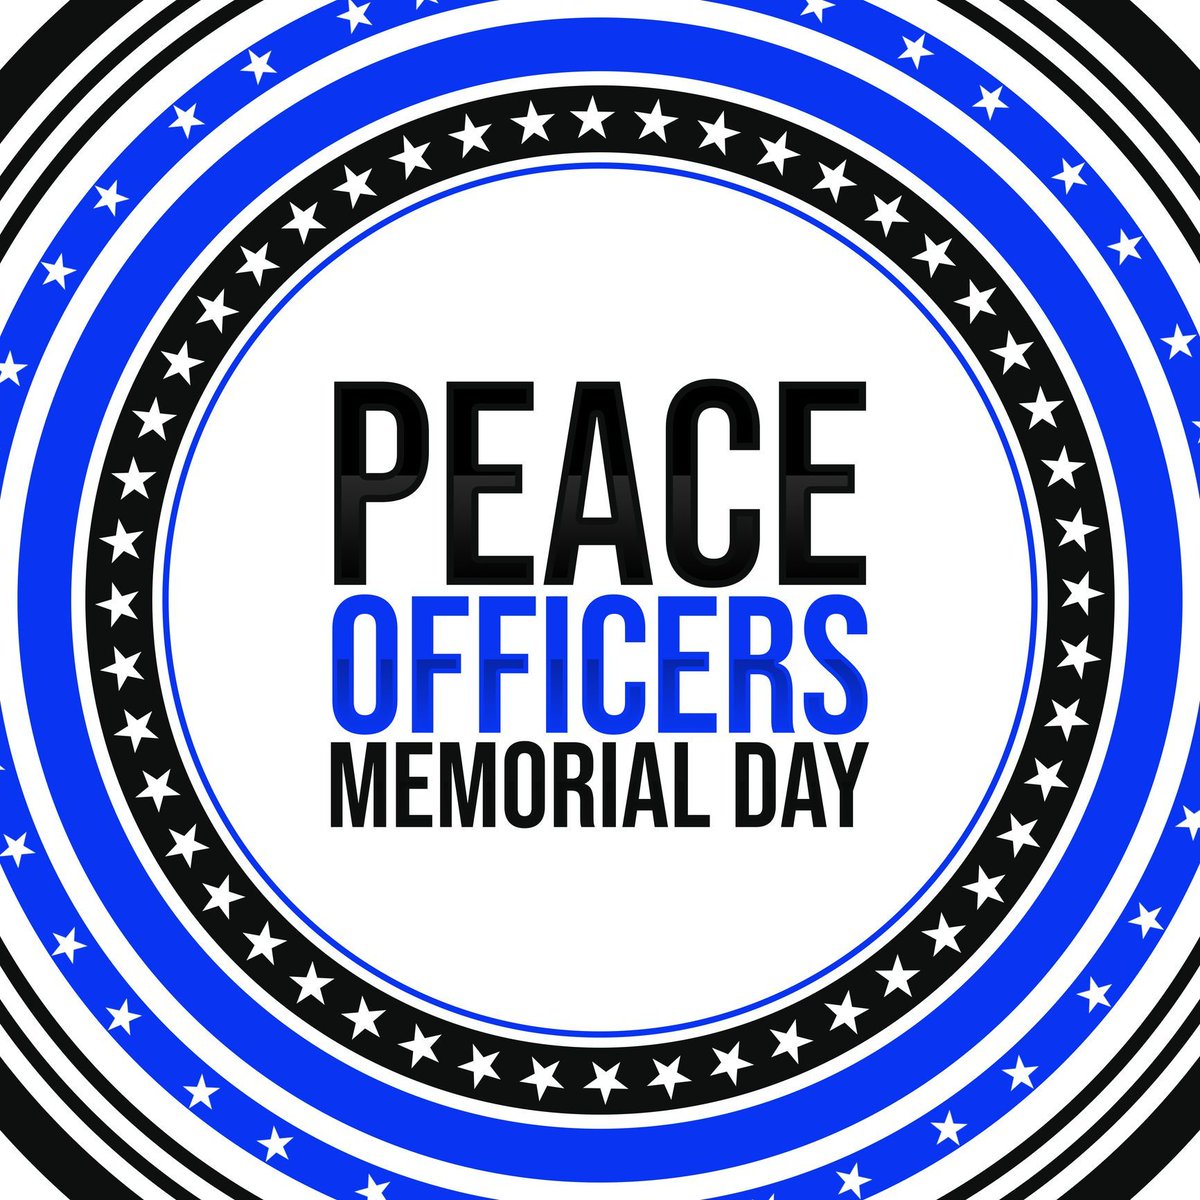 May 15 is #PeaceOfficersMemorialDay and this week is National Police Week. Today, we honor the courageous men & women in blue who paid the ultimate price in the line of duty protecting our communities. Thank you to the Azle ISD Police & Azle Police for keeping us safe! 💚